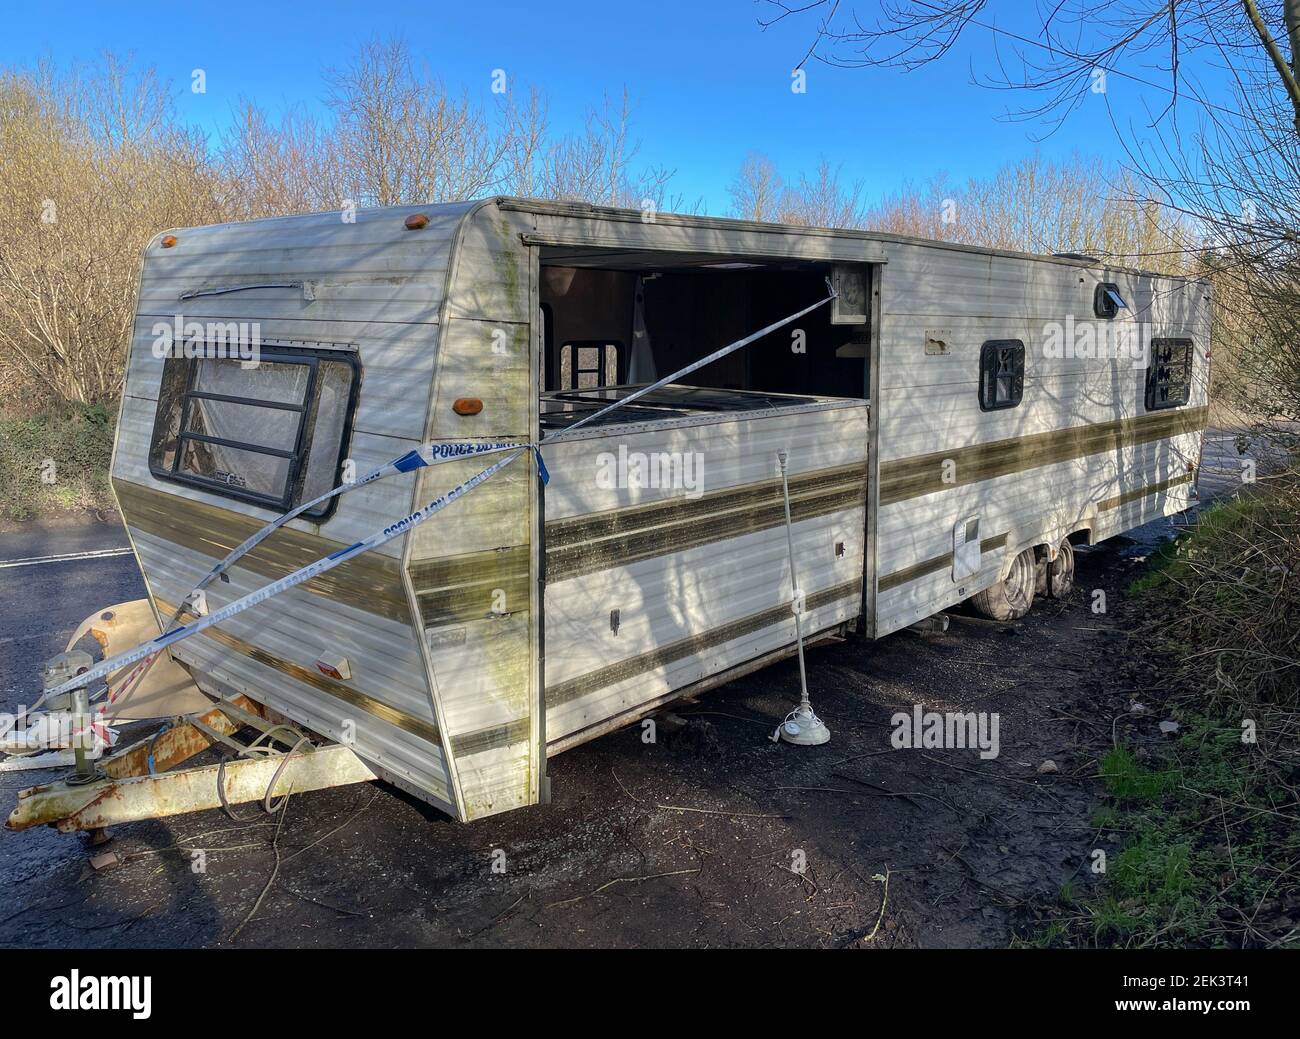 Abandoned  Caravan in a Lay-by on the A377 at Lapford Between Exeter and Barnstaple in Rural Devon, England, UK Stock Photo